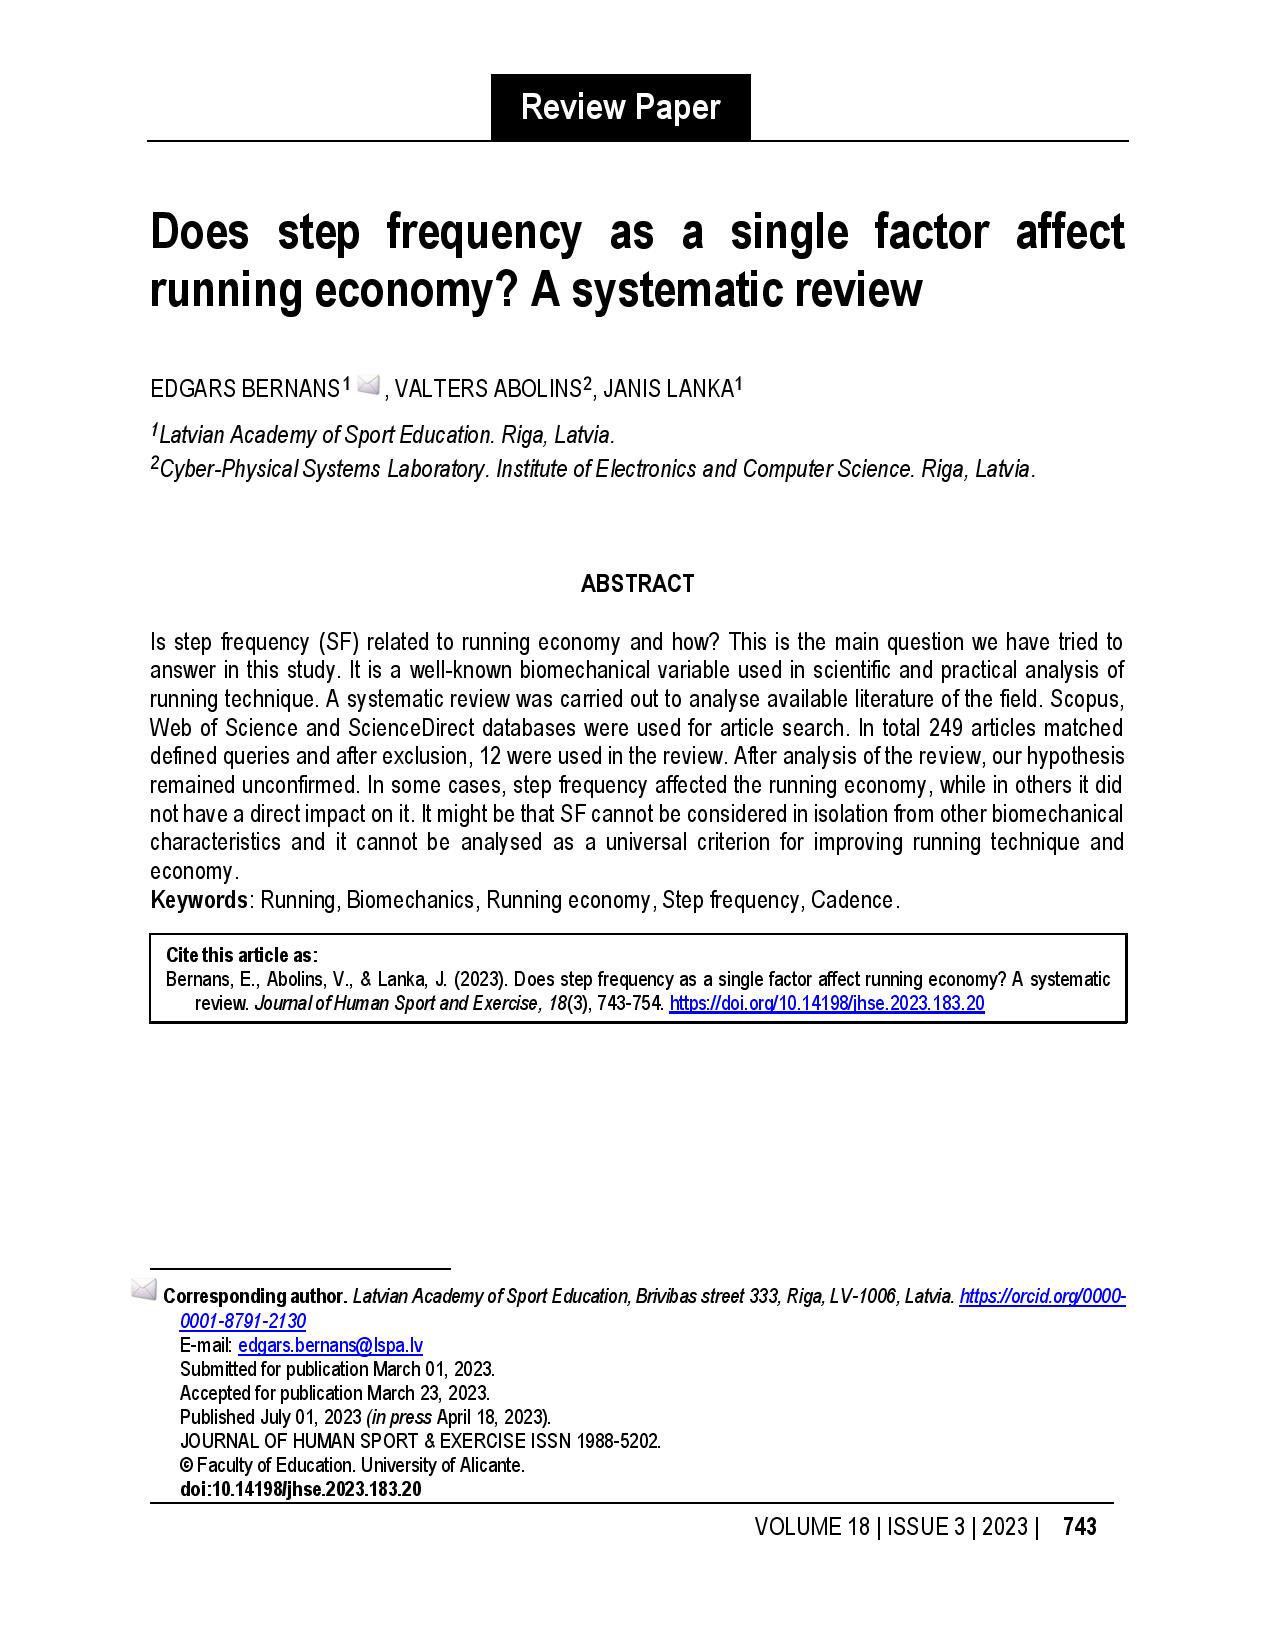 Does step frequency as a single factor affect running economy? A systematic review